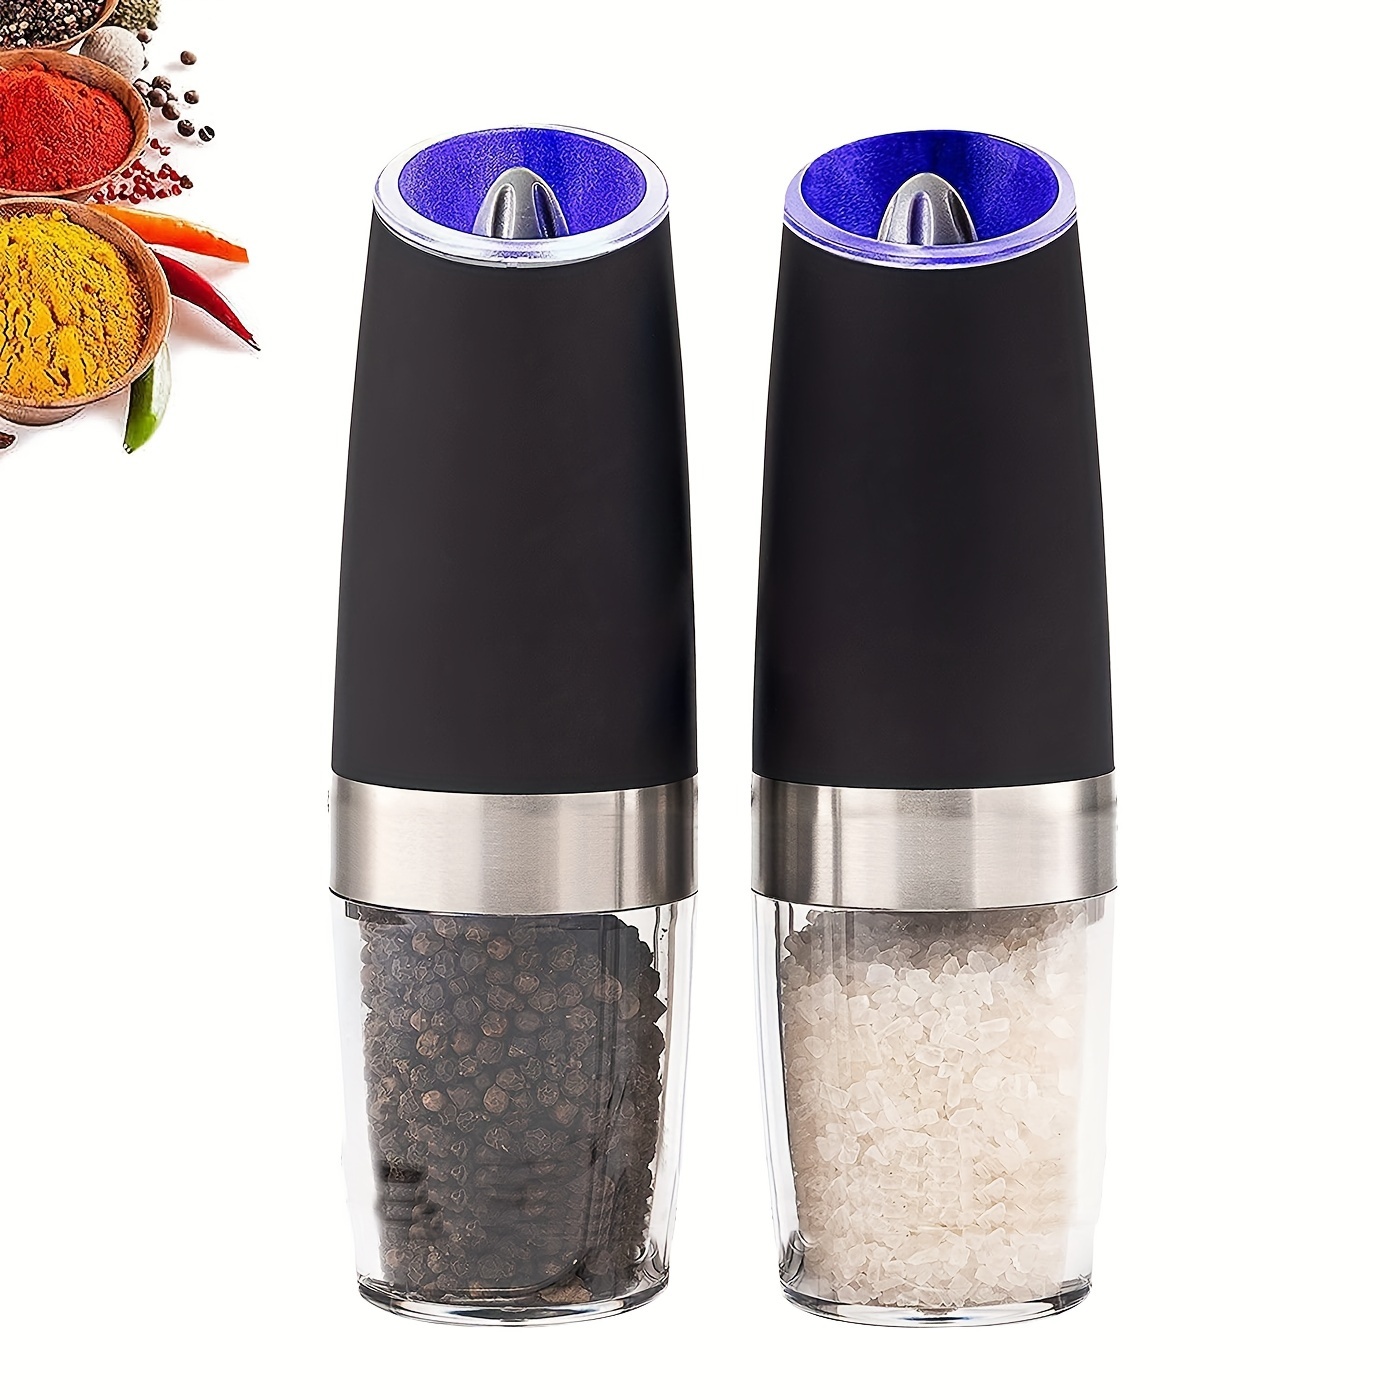 

1/2pcs Gravity Electric Pepper And Salt Grinder Set, Adjustable Coarseness, Battery Powered With Led Light, 1 Hand Automatic Operation, Stainless Steel Black 7.8inch/2inch